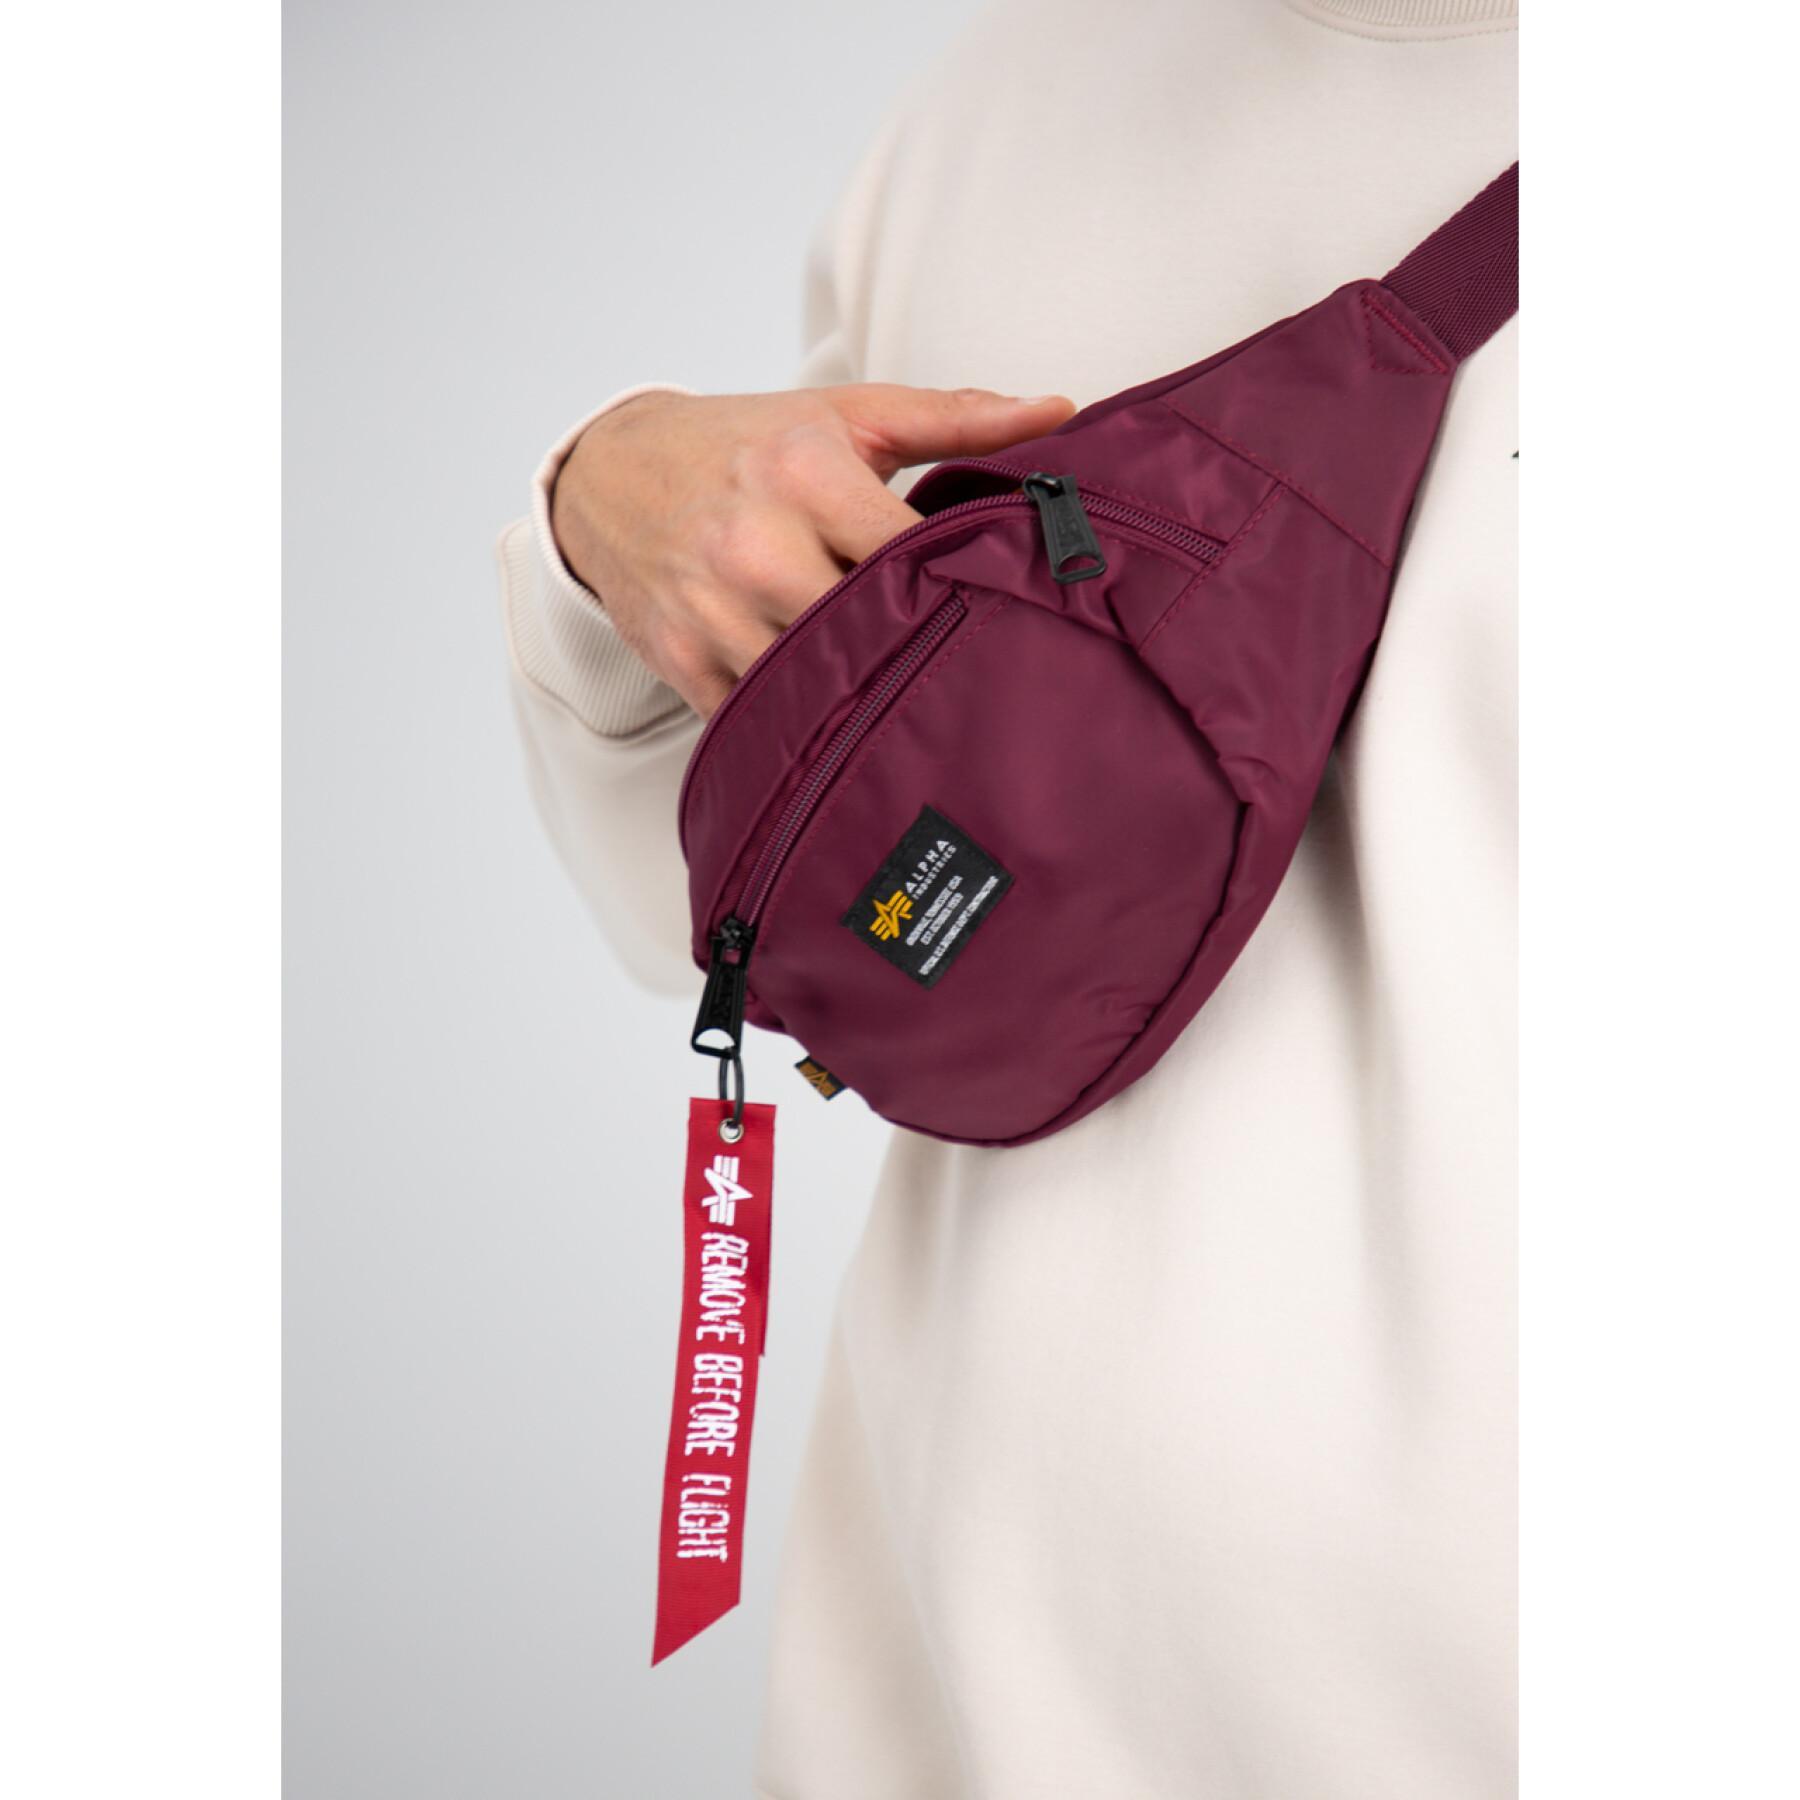 Fanny pack Alpha Industries Crew